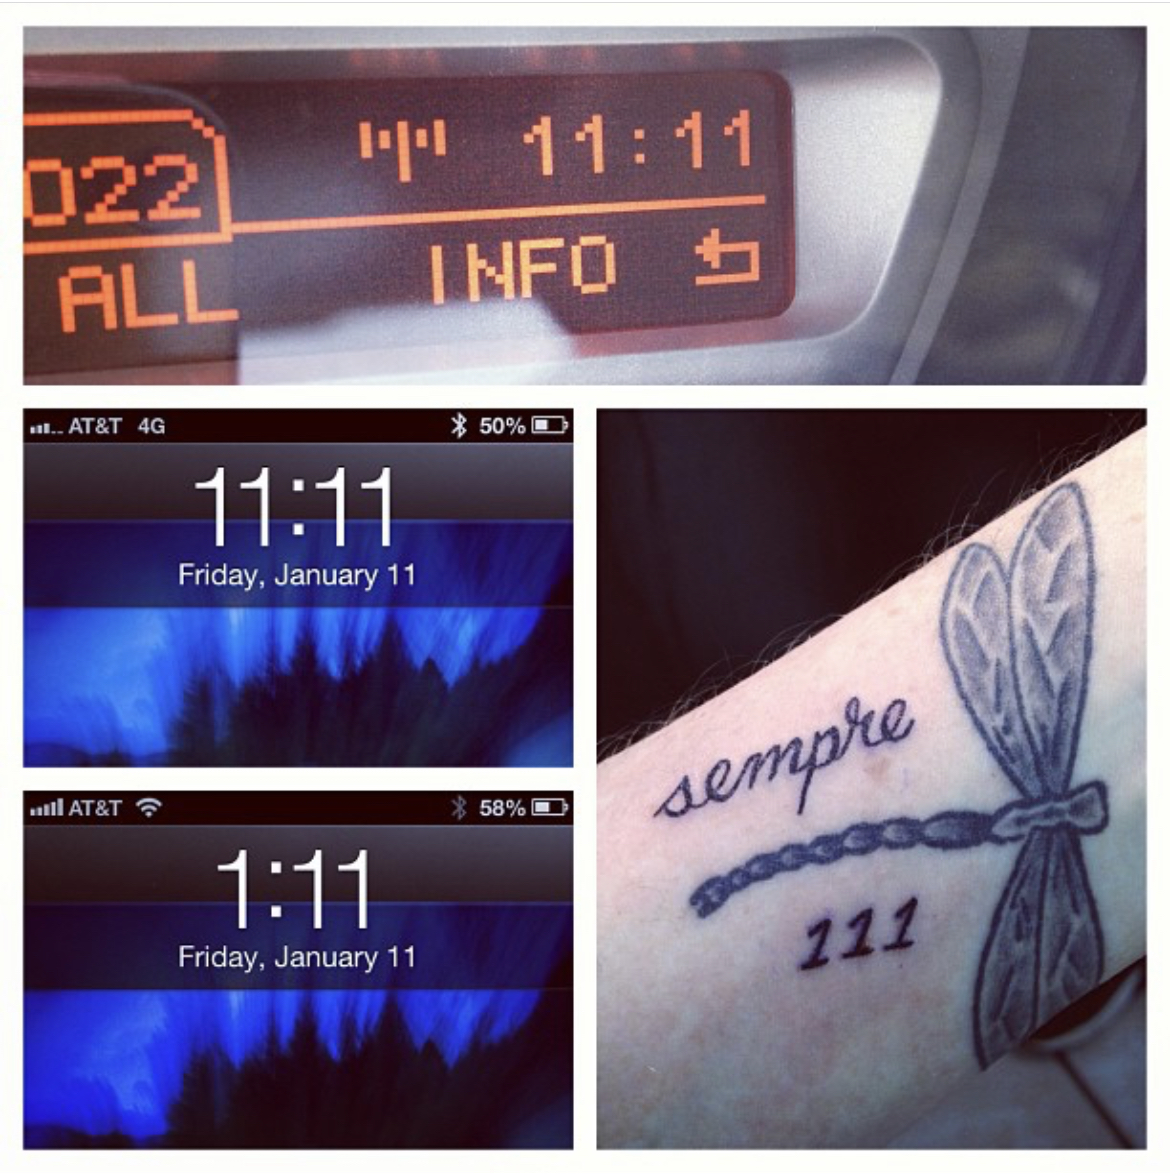 My birthday is on 1/11. I see 1:11 and 11:11 all the time (as in always, get it?). These screenshots were taken on 1/11. It's no joke! I don't go looking for it.Moving forward the tat stories start getting way more interesting. You'll see.